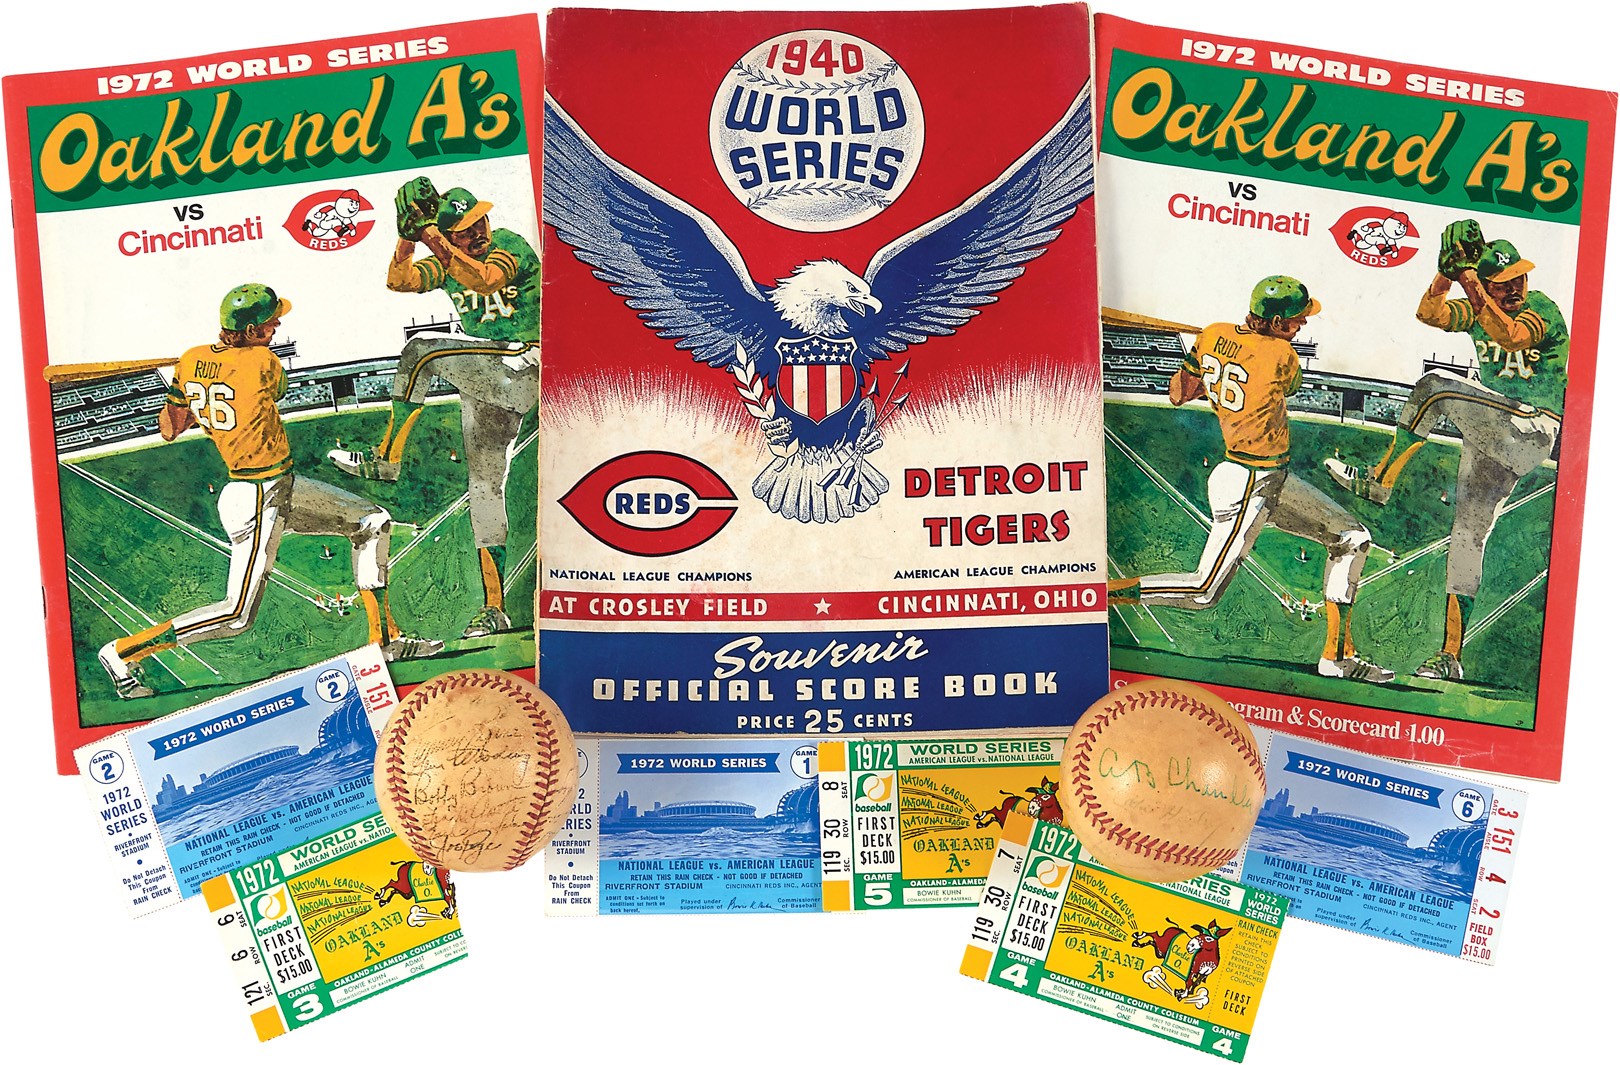 The Cal Hubbard Collection - Cal Hubbard's World Series Collection (11)